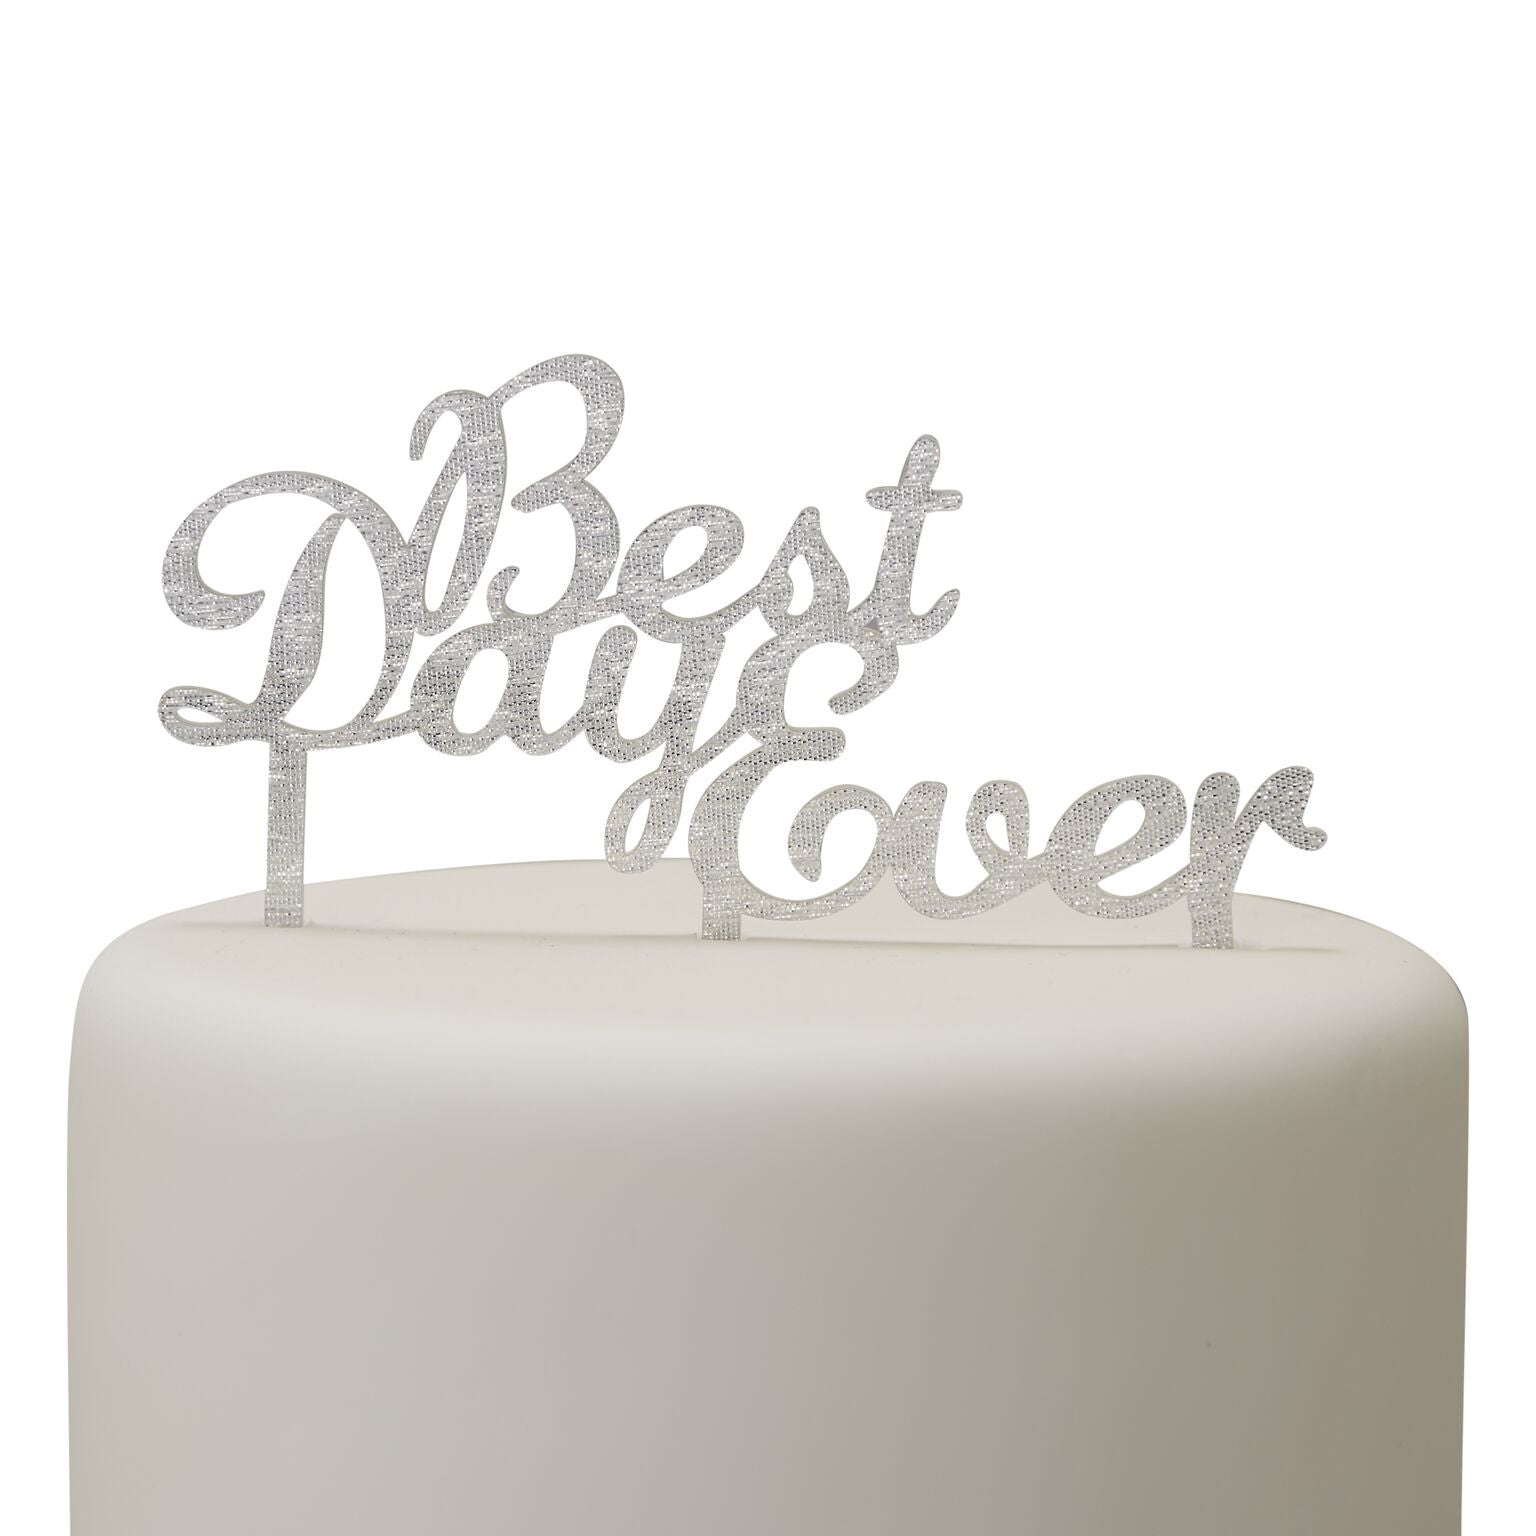  "Best Day Ever" Cake Topper - Silver, GR-Ginger Ray UK, Putti Fine Furnishings